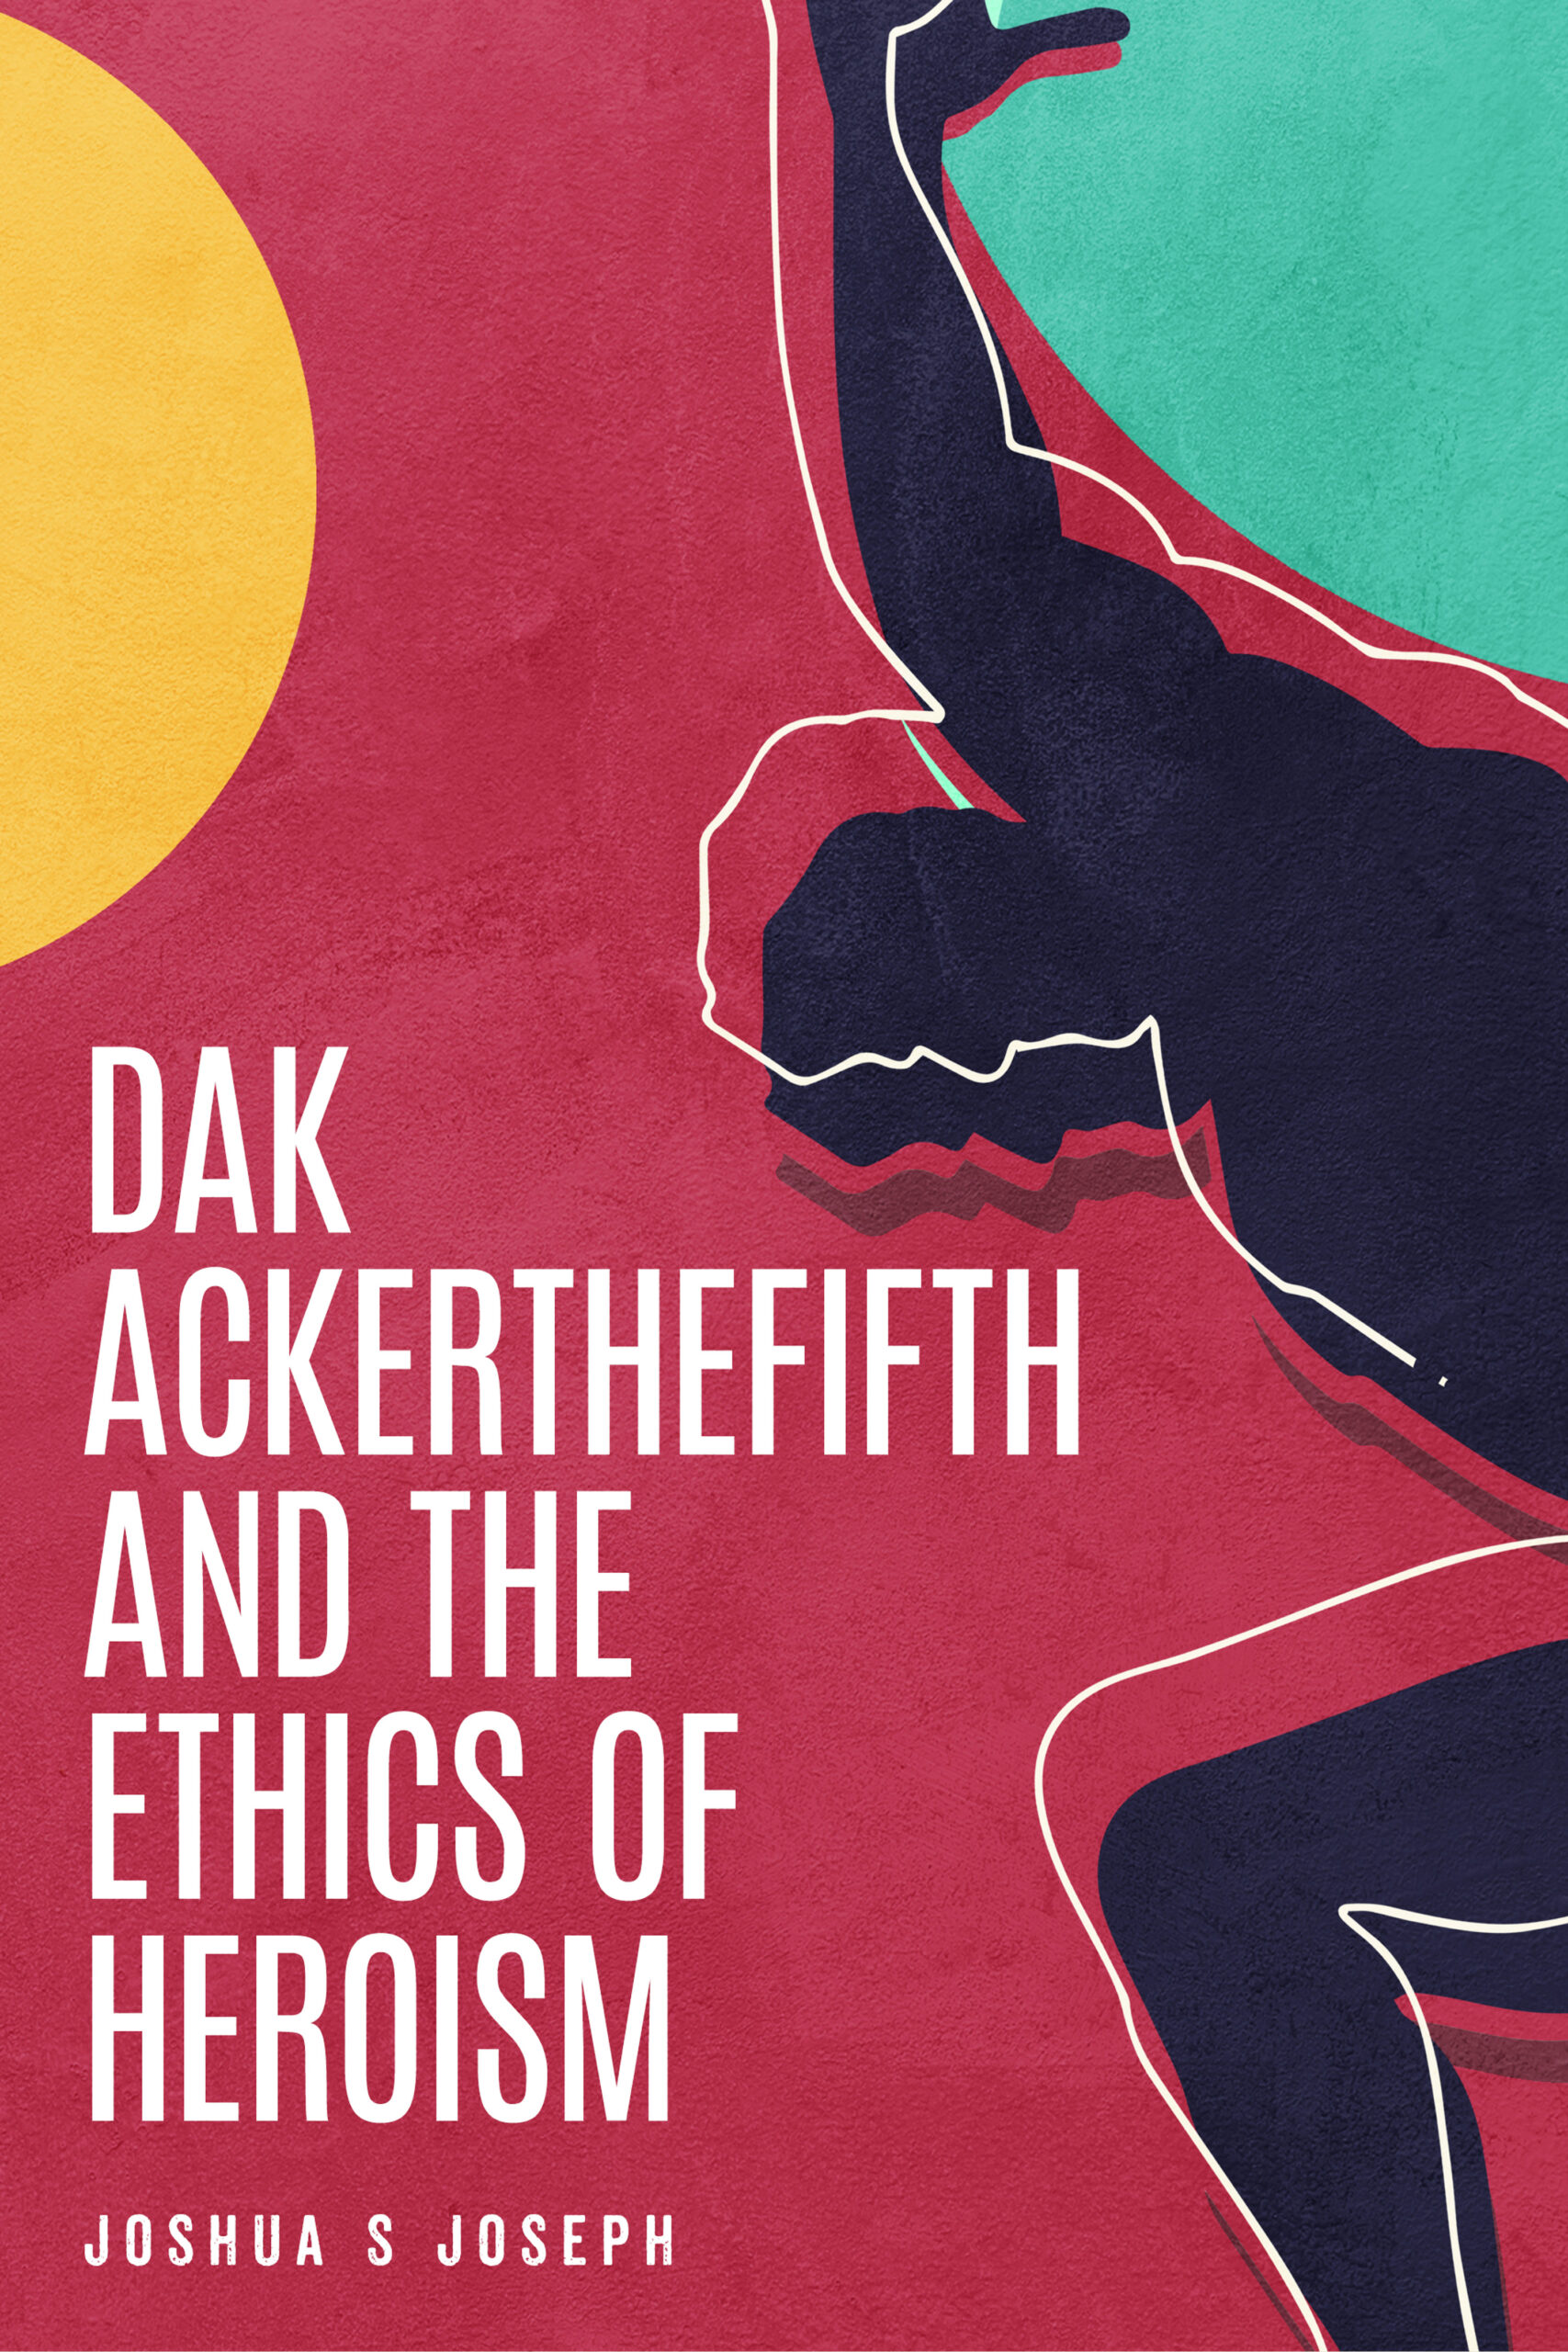 FREE: Dak Ackerthefifth and the Ethics of Heroism by Joshua S Joseph